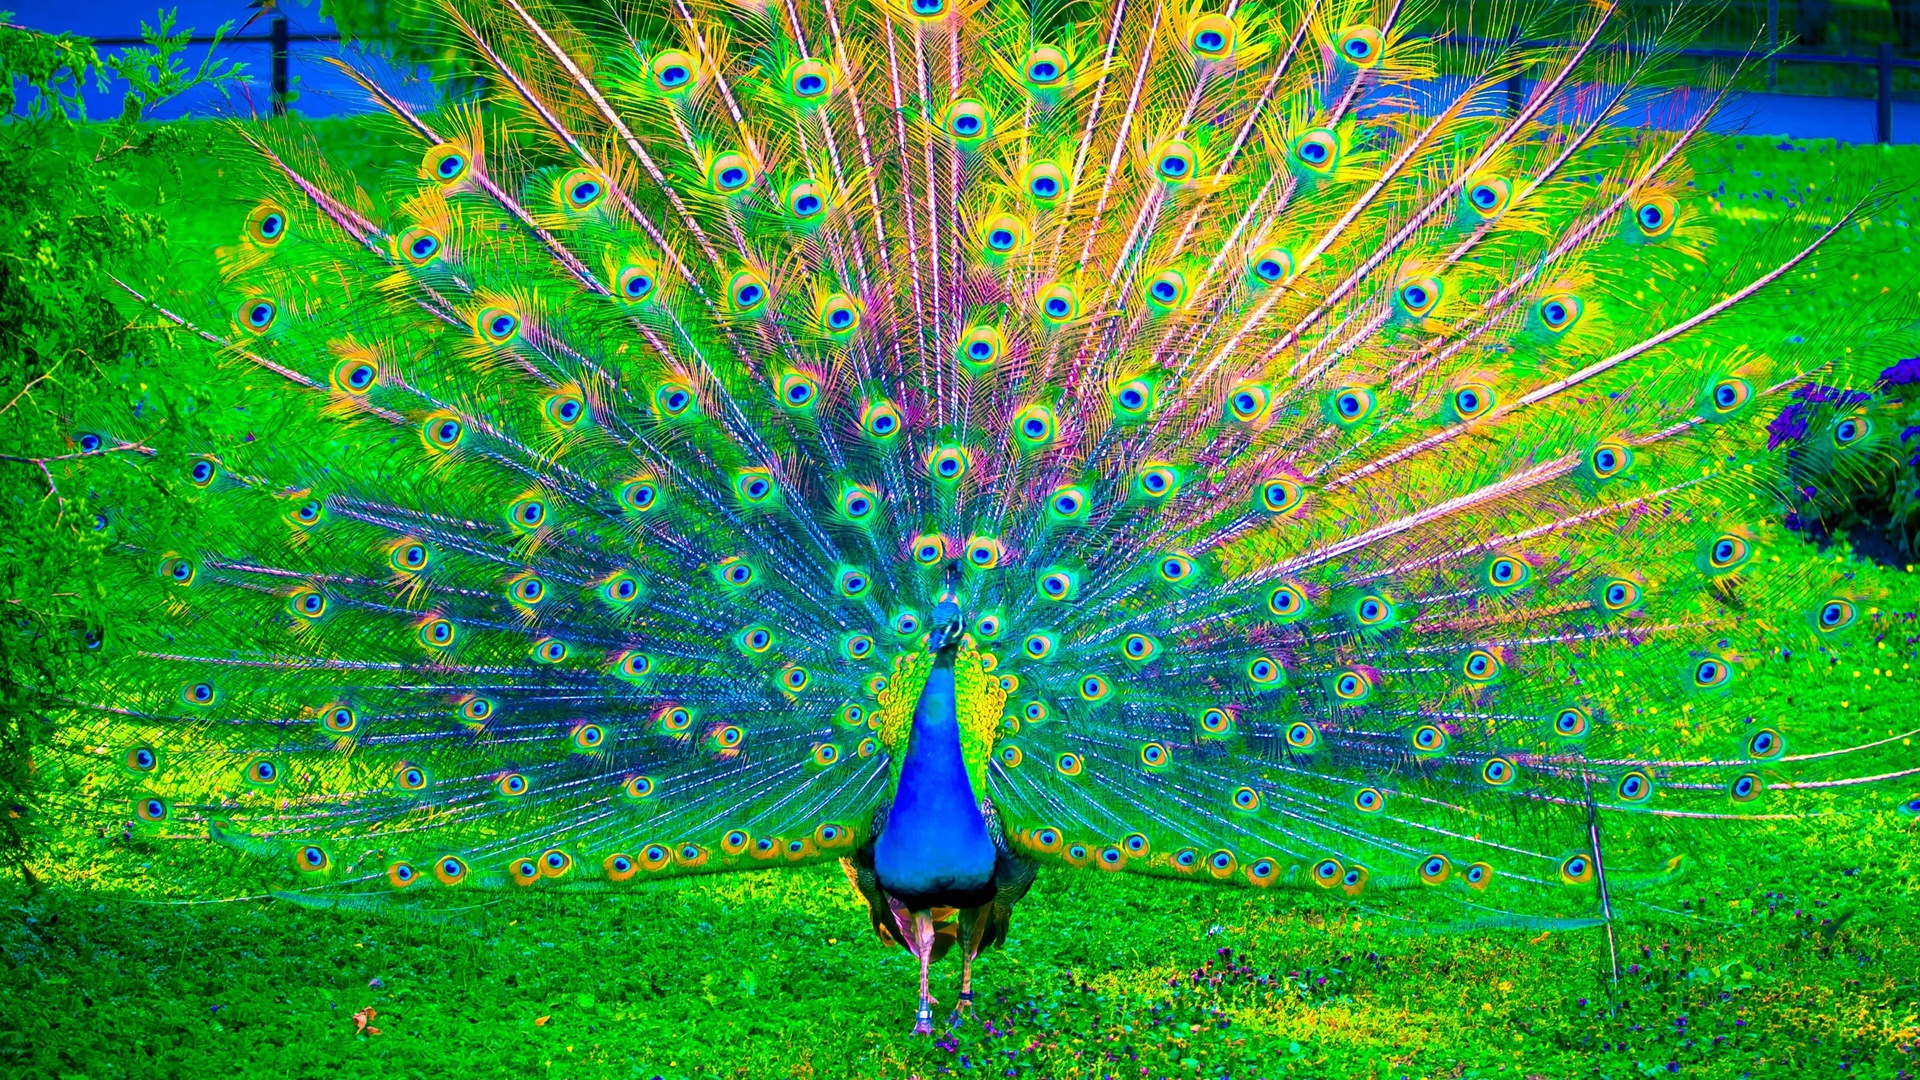 Download 1920x1080 Wallpaper Peacock, Peafowl Colorful Bird Dance, Full Hd,  Hdtv, Fhd, 1080p, 1920x1080 Hd Image, Background, 6313